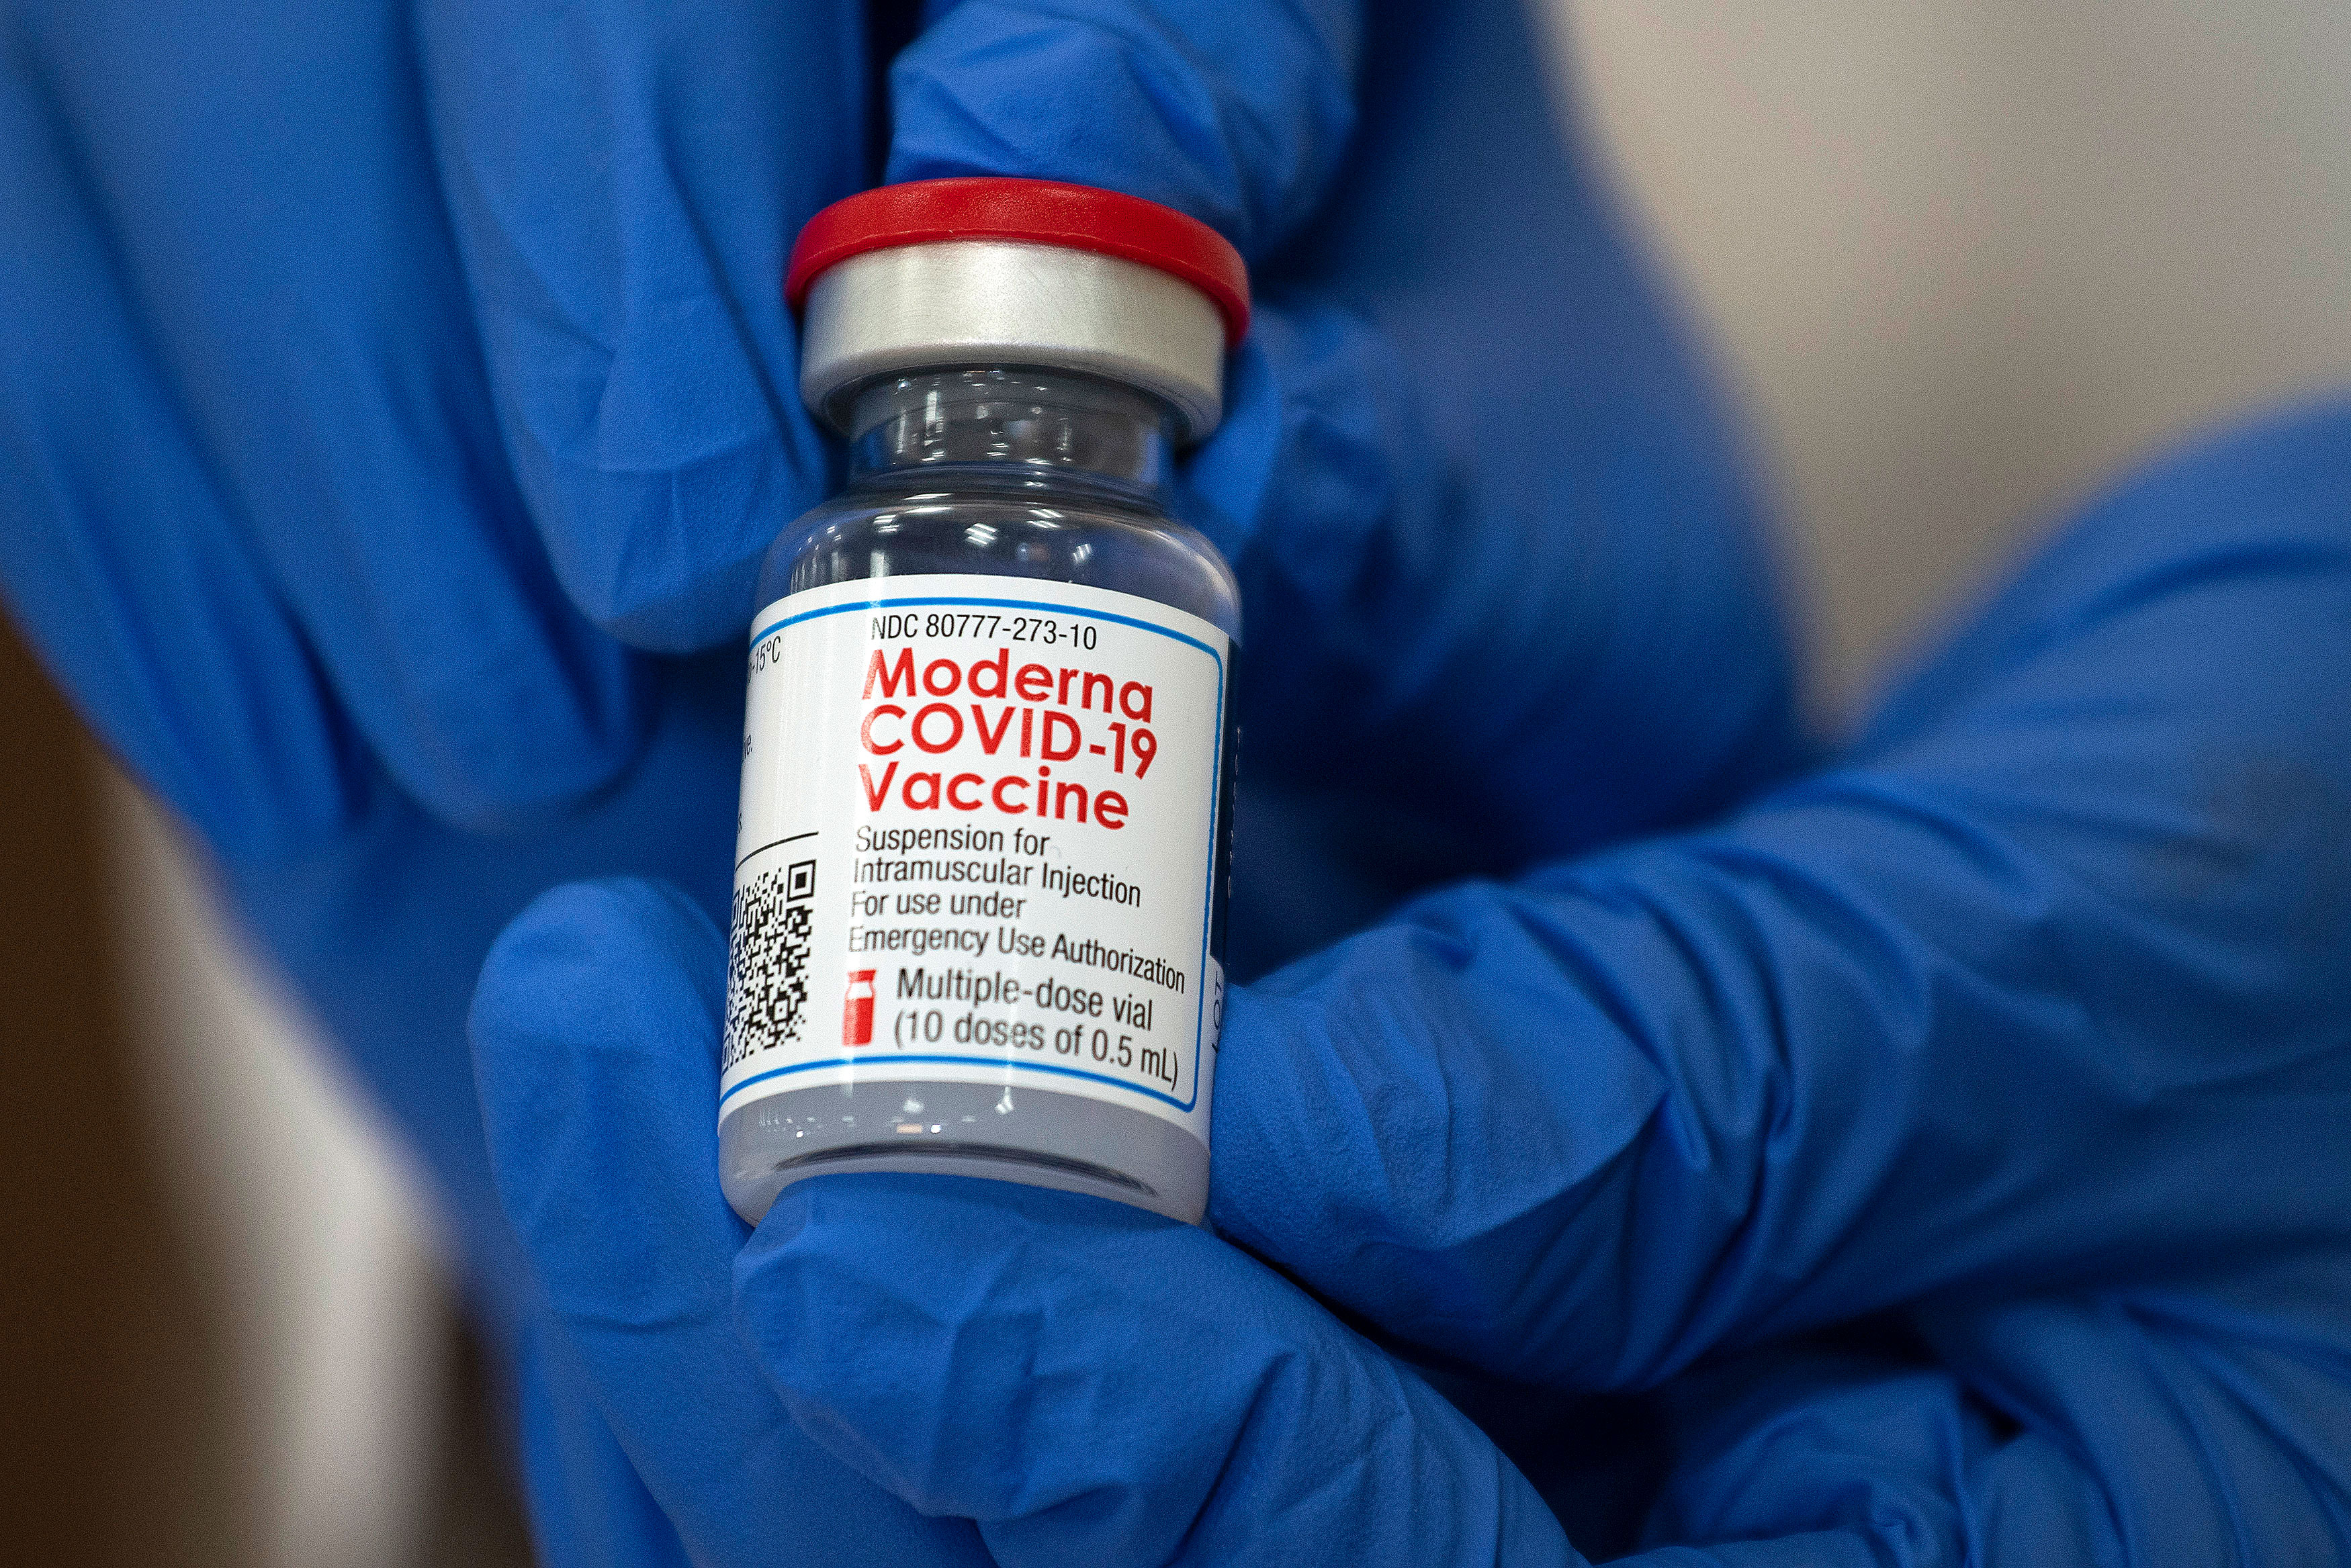 A vial of the Moderna Covid-19 vaccine is pictured at a hospital in Valley Stream, New York, on December 21.